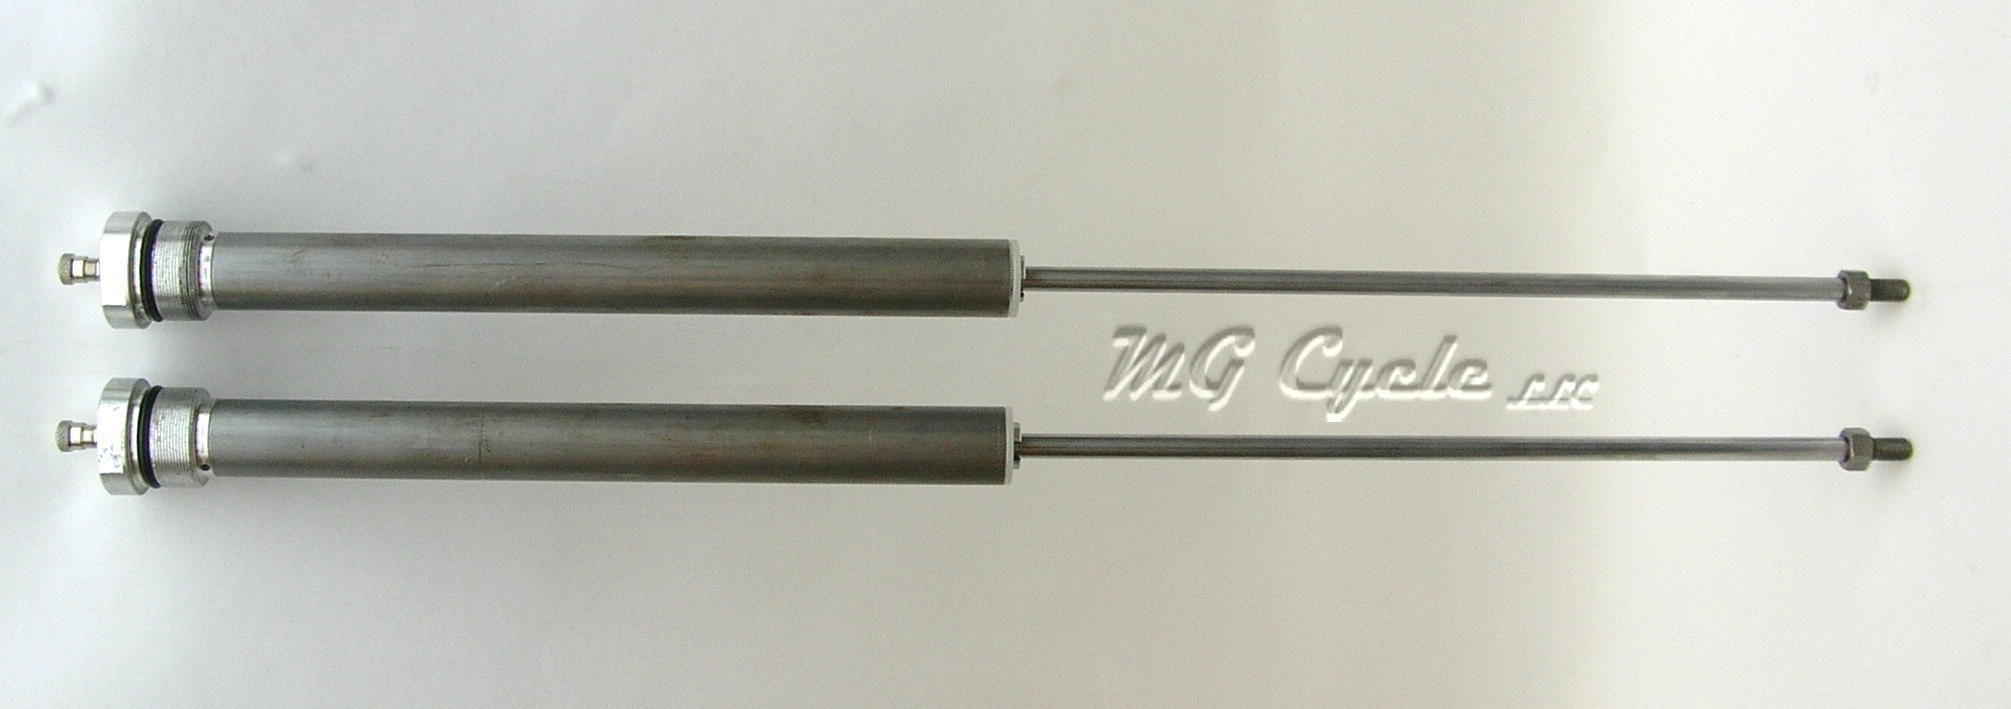 FAC fork damper set, T5 1st and 2nd series - Click Image to Close